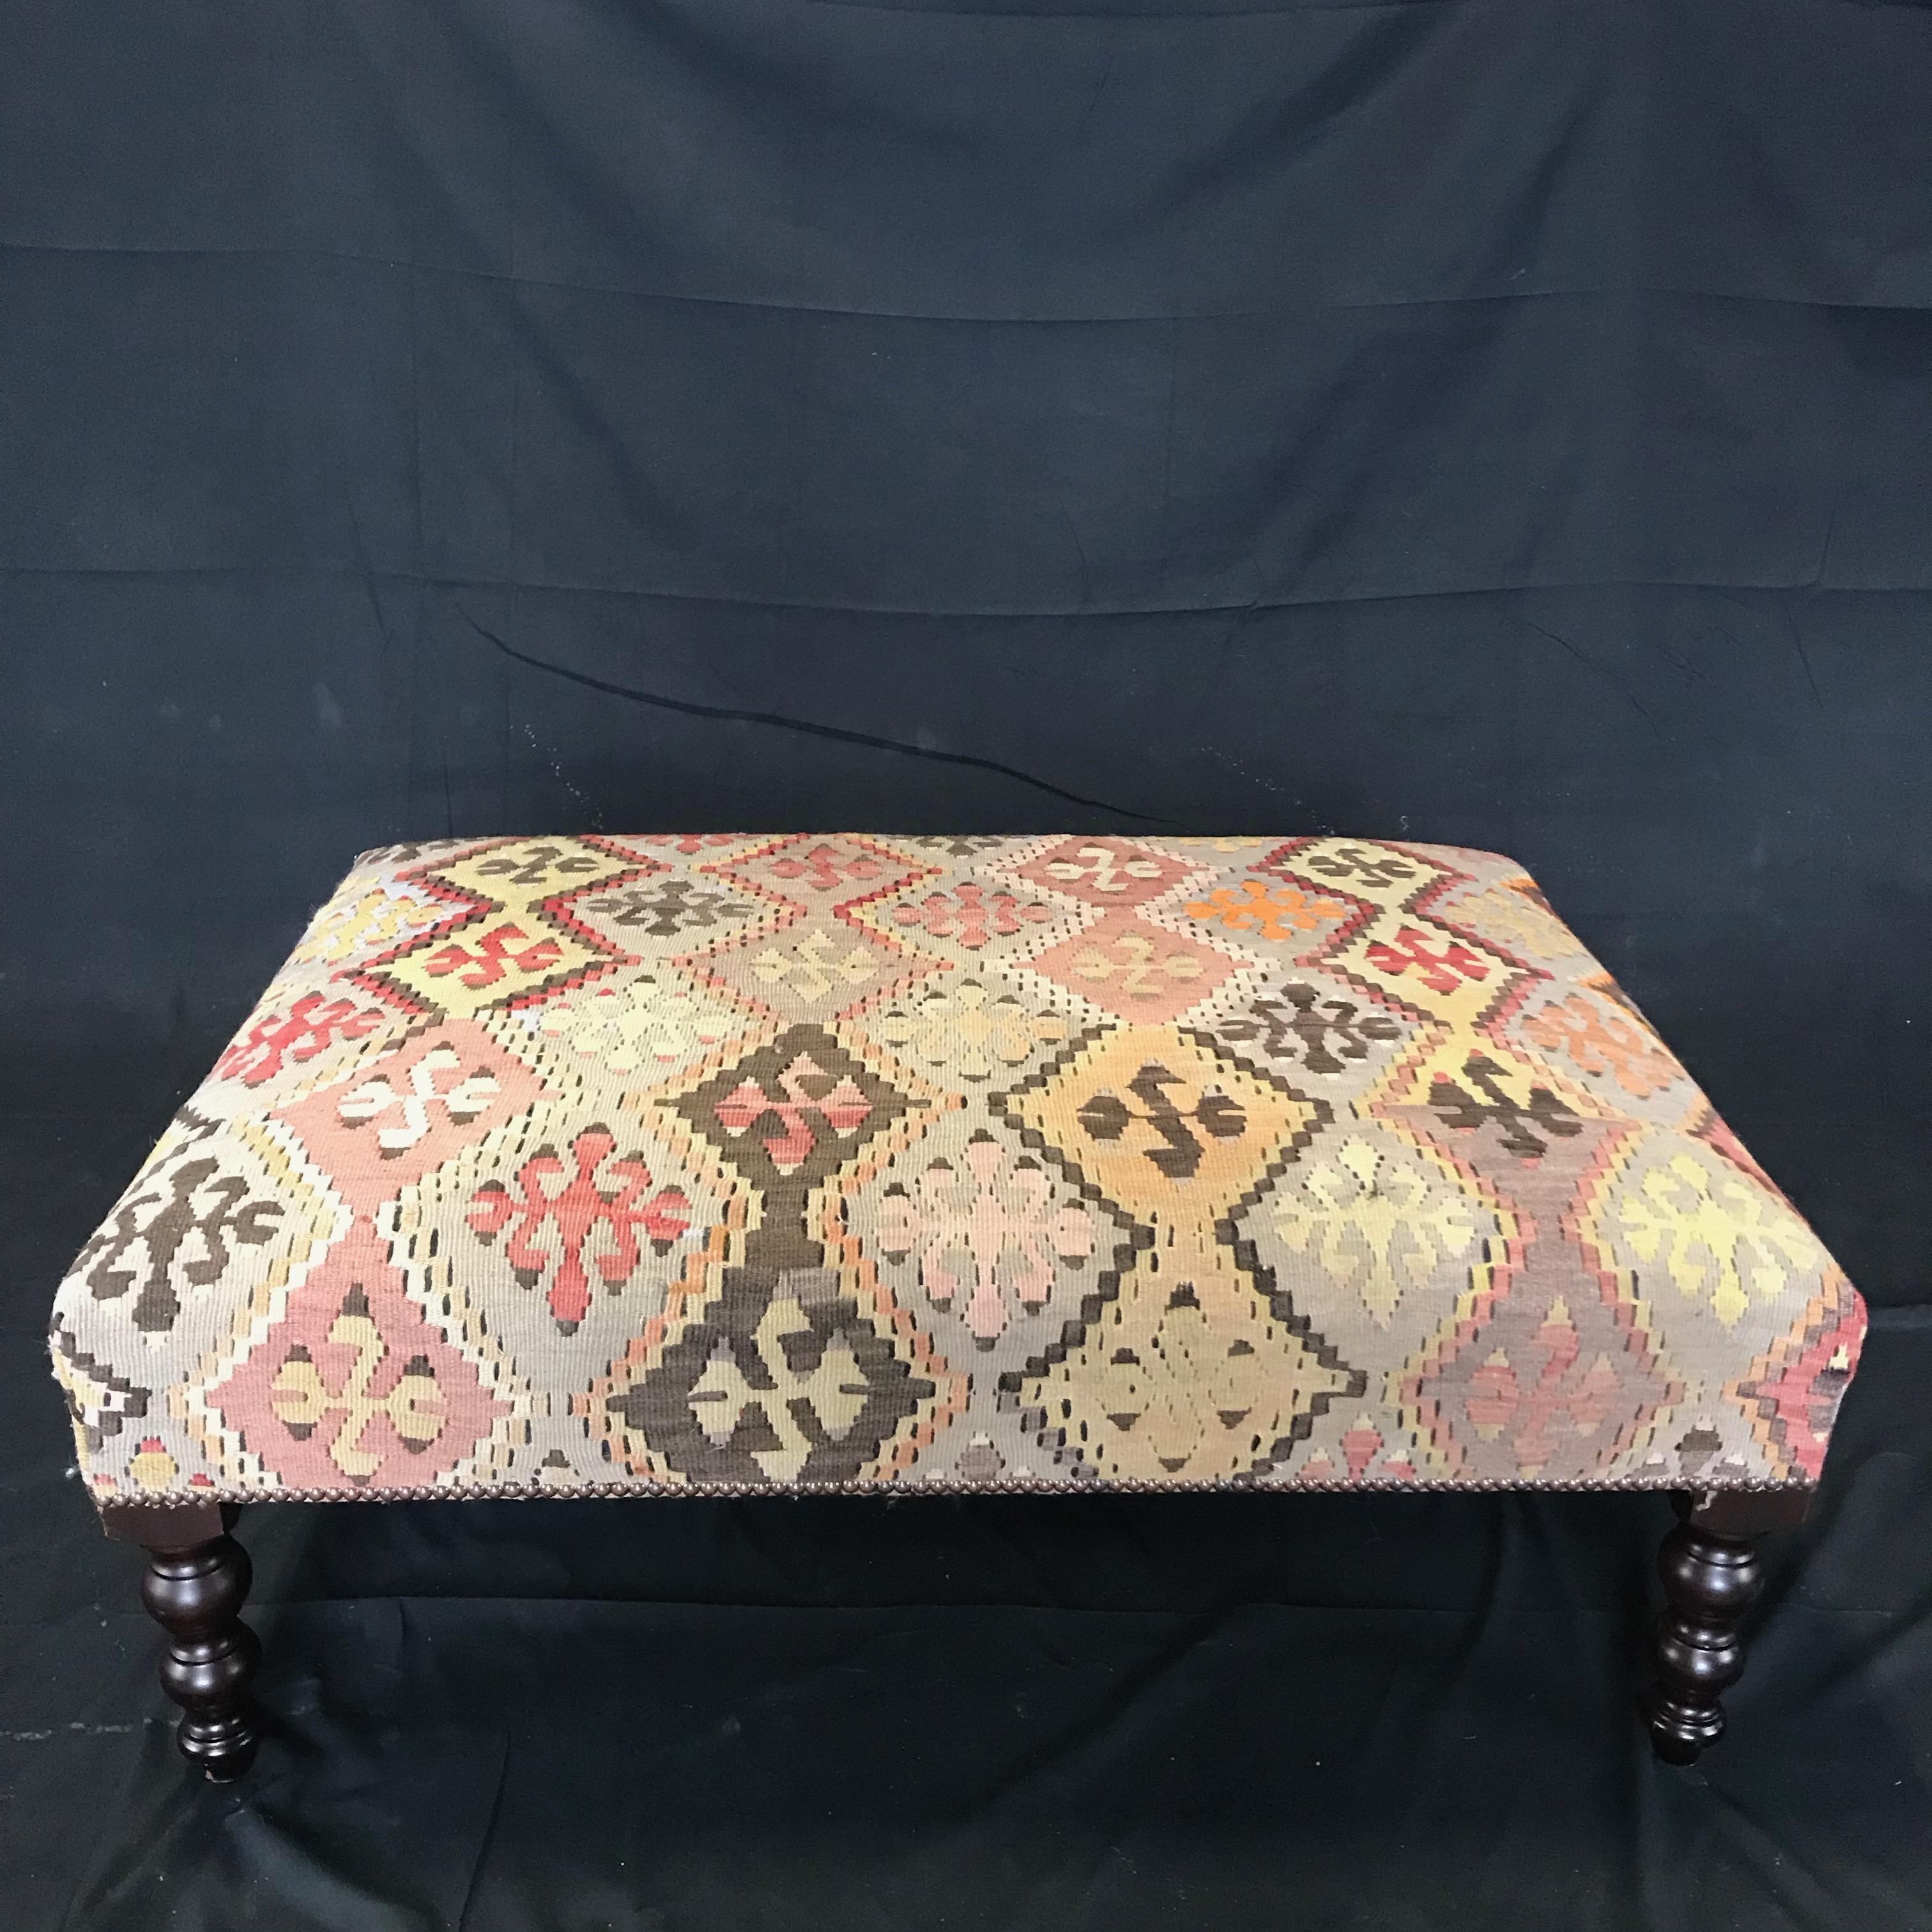 To die for pair of original George Smith kilim upholstered signature ottomans. The upholstery is in excellent condition throughout; it has some desirable fading which gives it the right English country home look and feel. Original tags.
#5001.